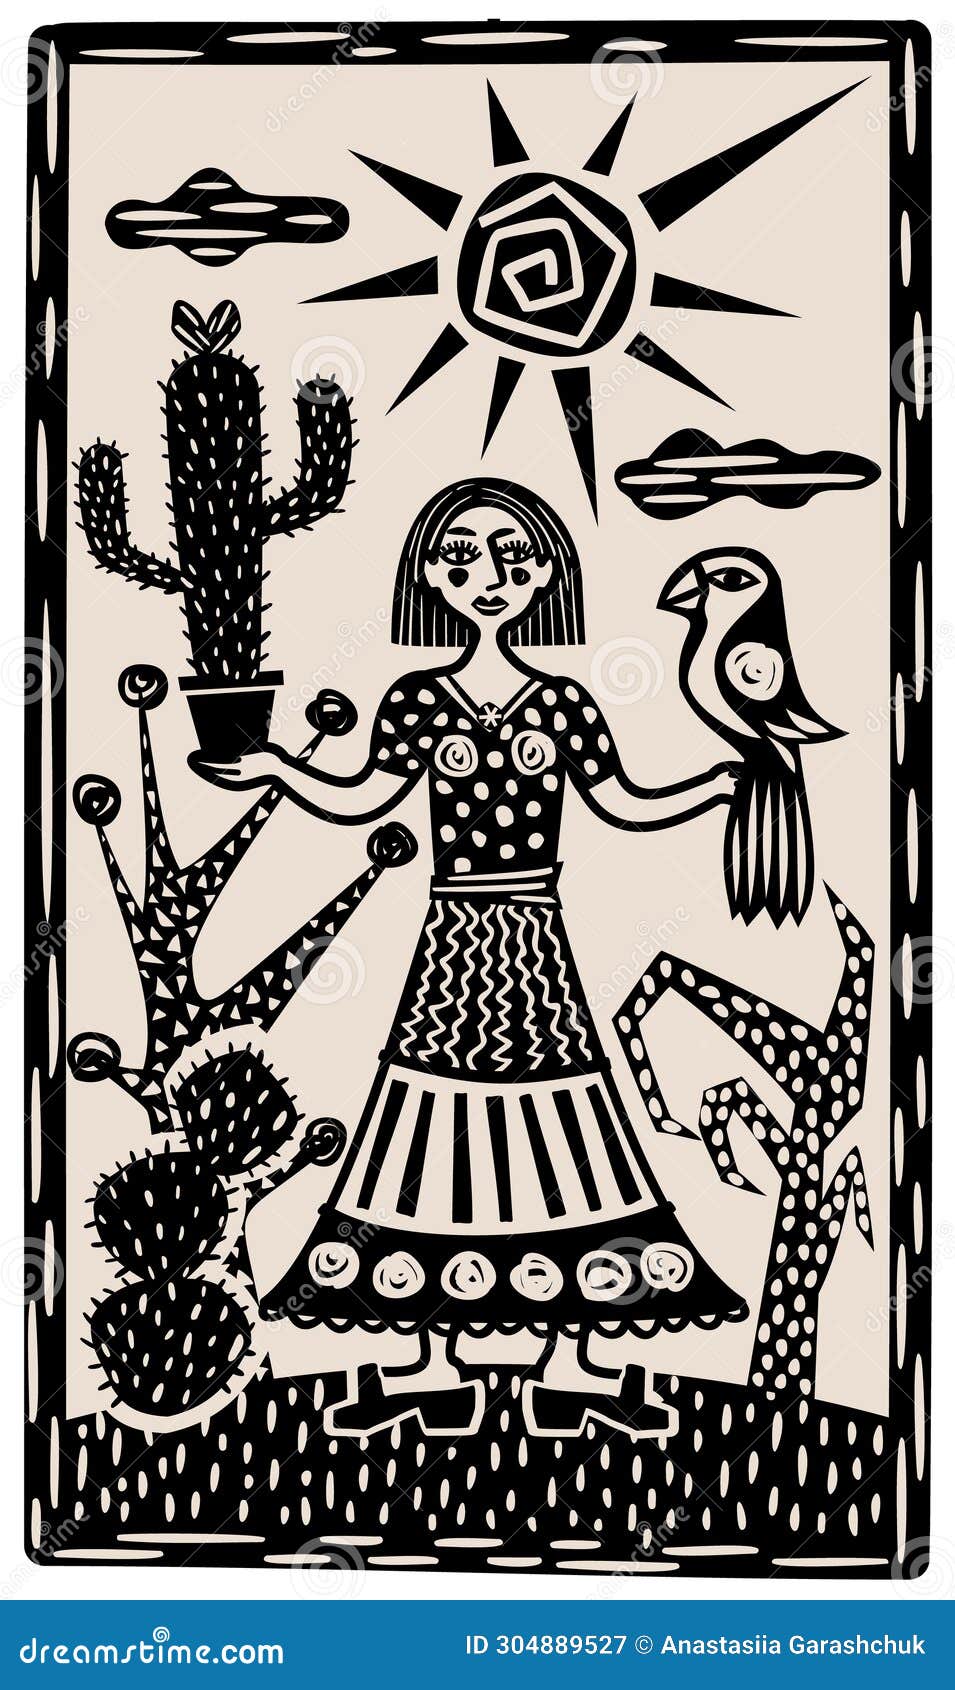 brasilian cordel style. woman with cactus and parrot. woodcut style